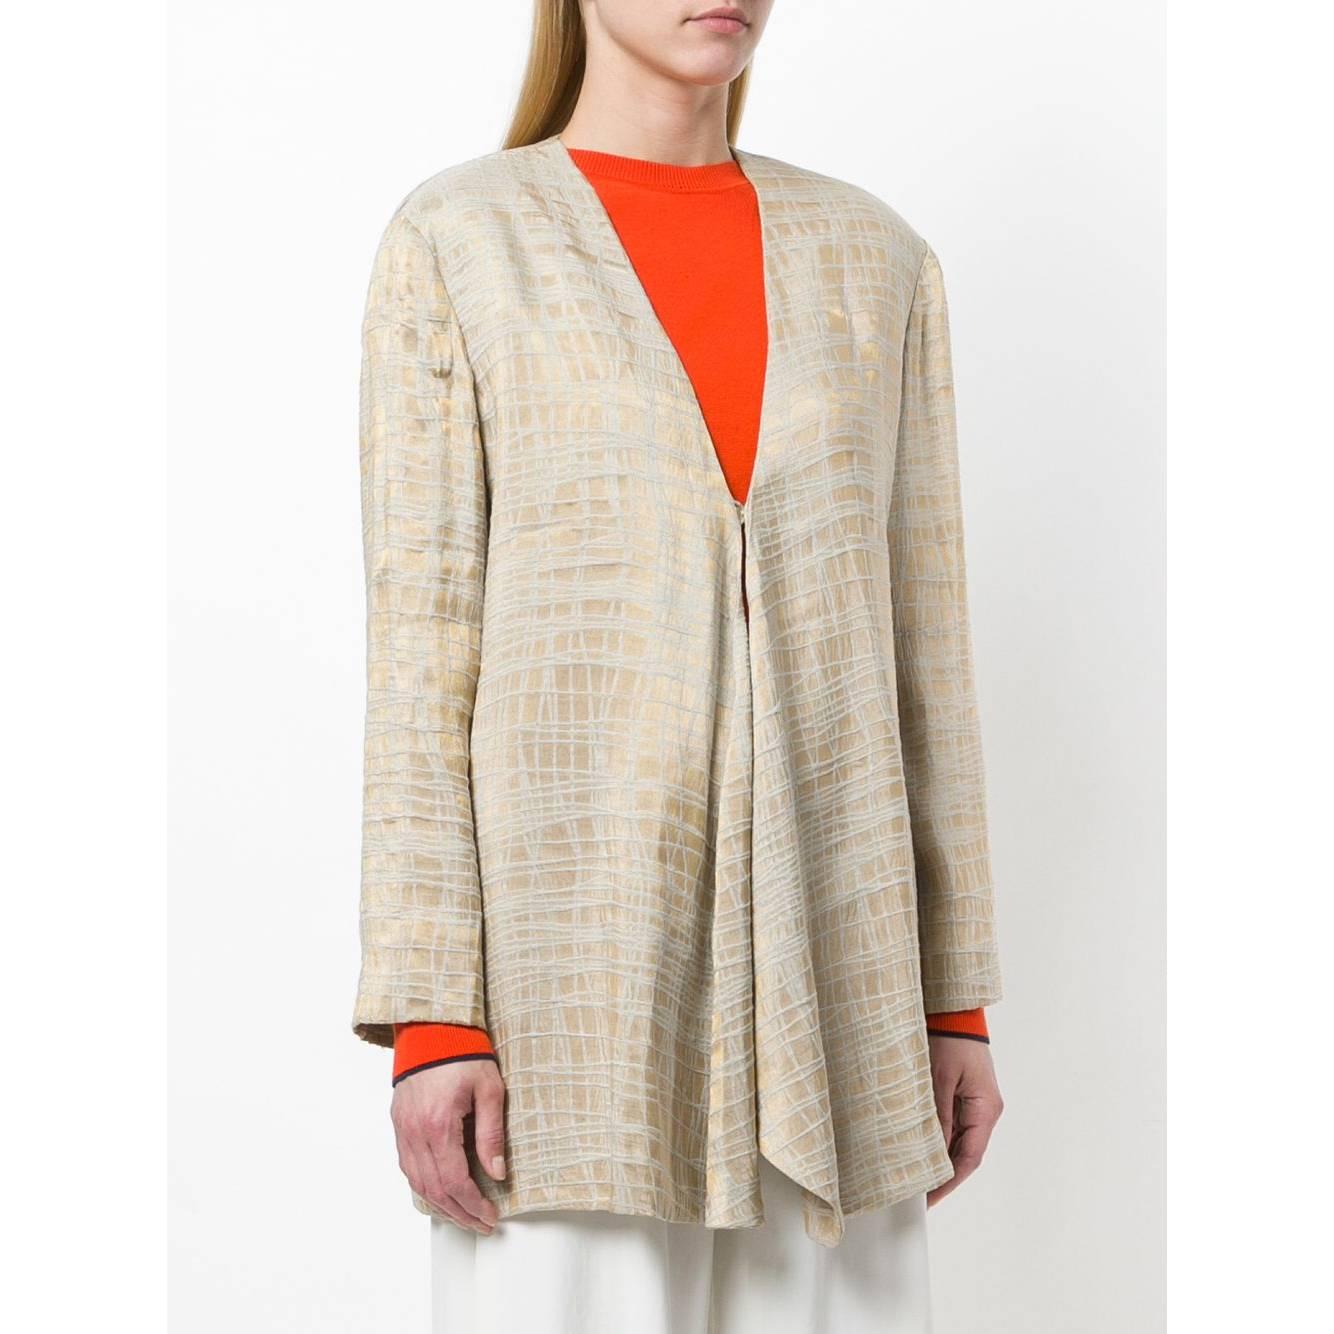 A.N.G.E.L.O. VINTAGE - Italy

Beige and gold linen-silk blend Giorgio Armani jacket featuring a v-neck, long sleeves, an asymmetric hem, a textured style and a single button front fastening.

Years: 90s

Made in Italy

Size: 48 IT



Flat